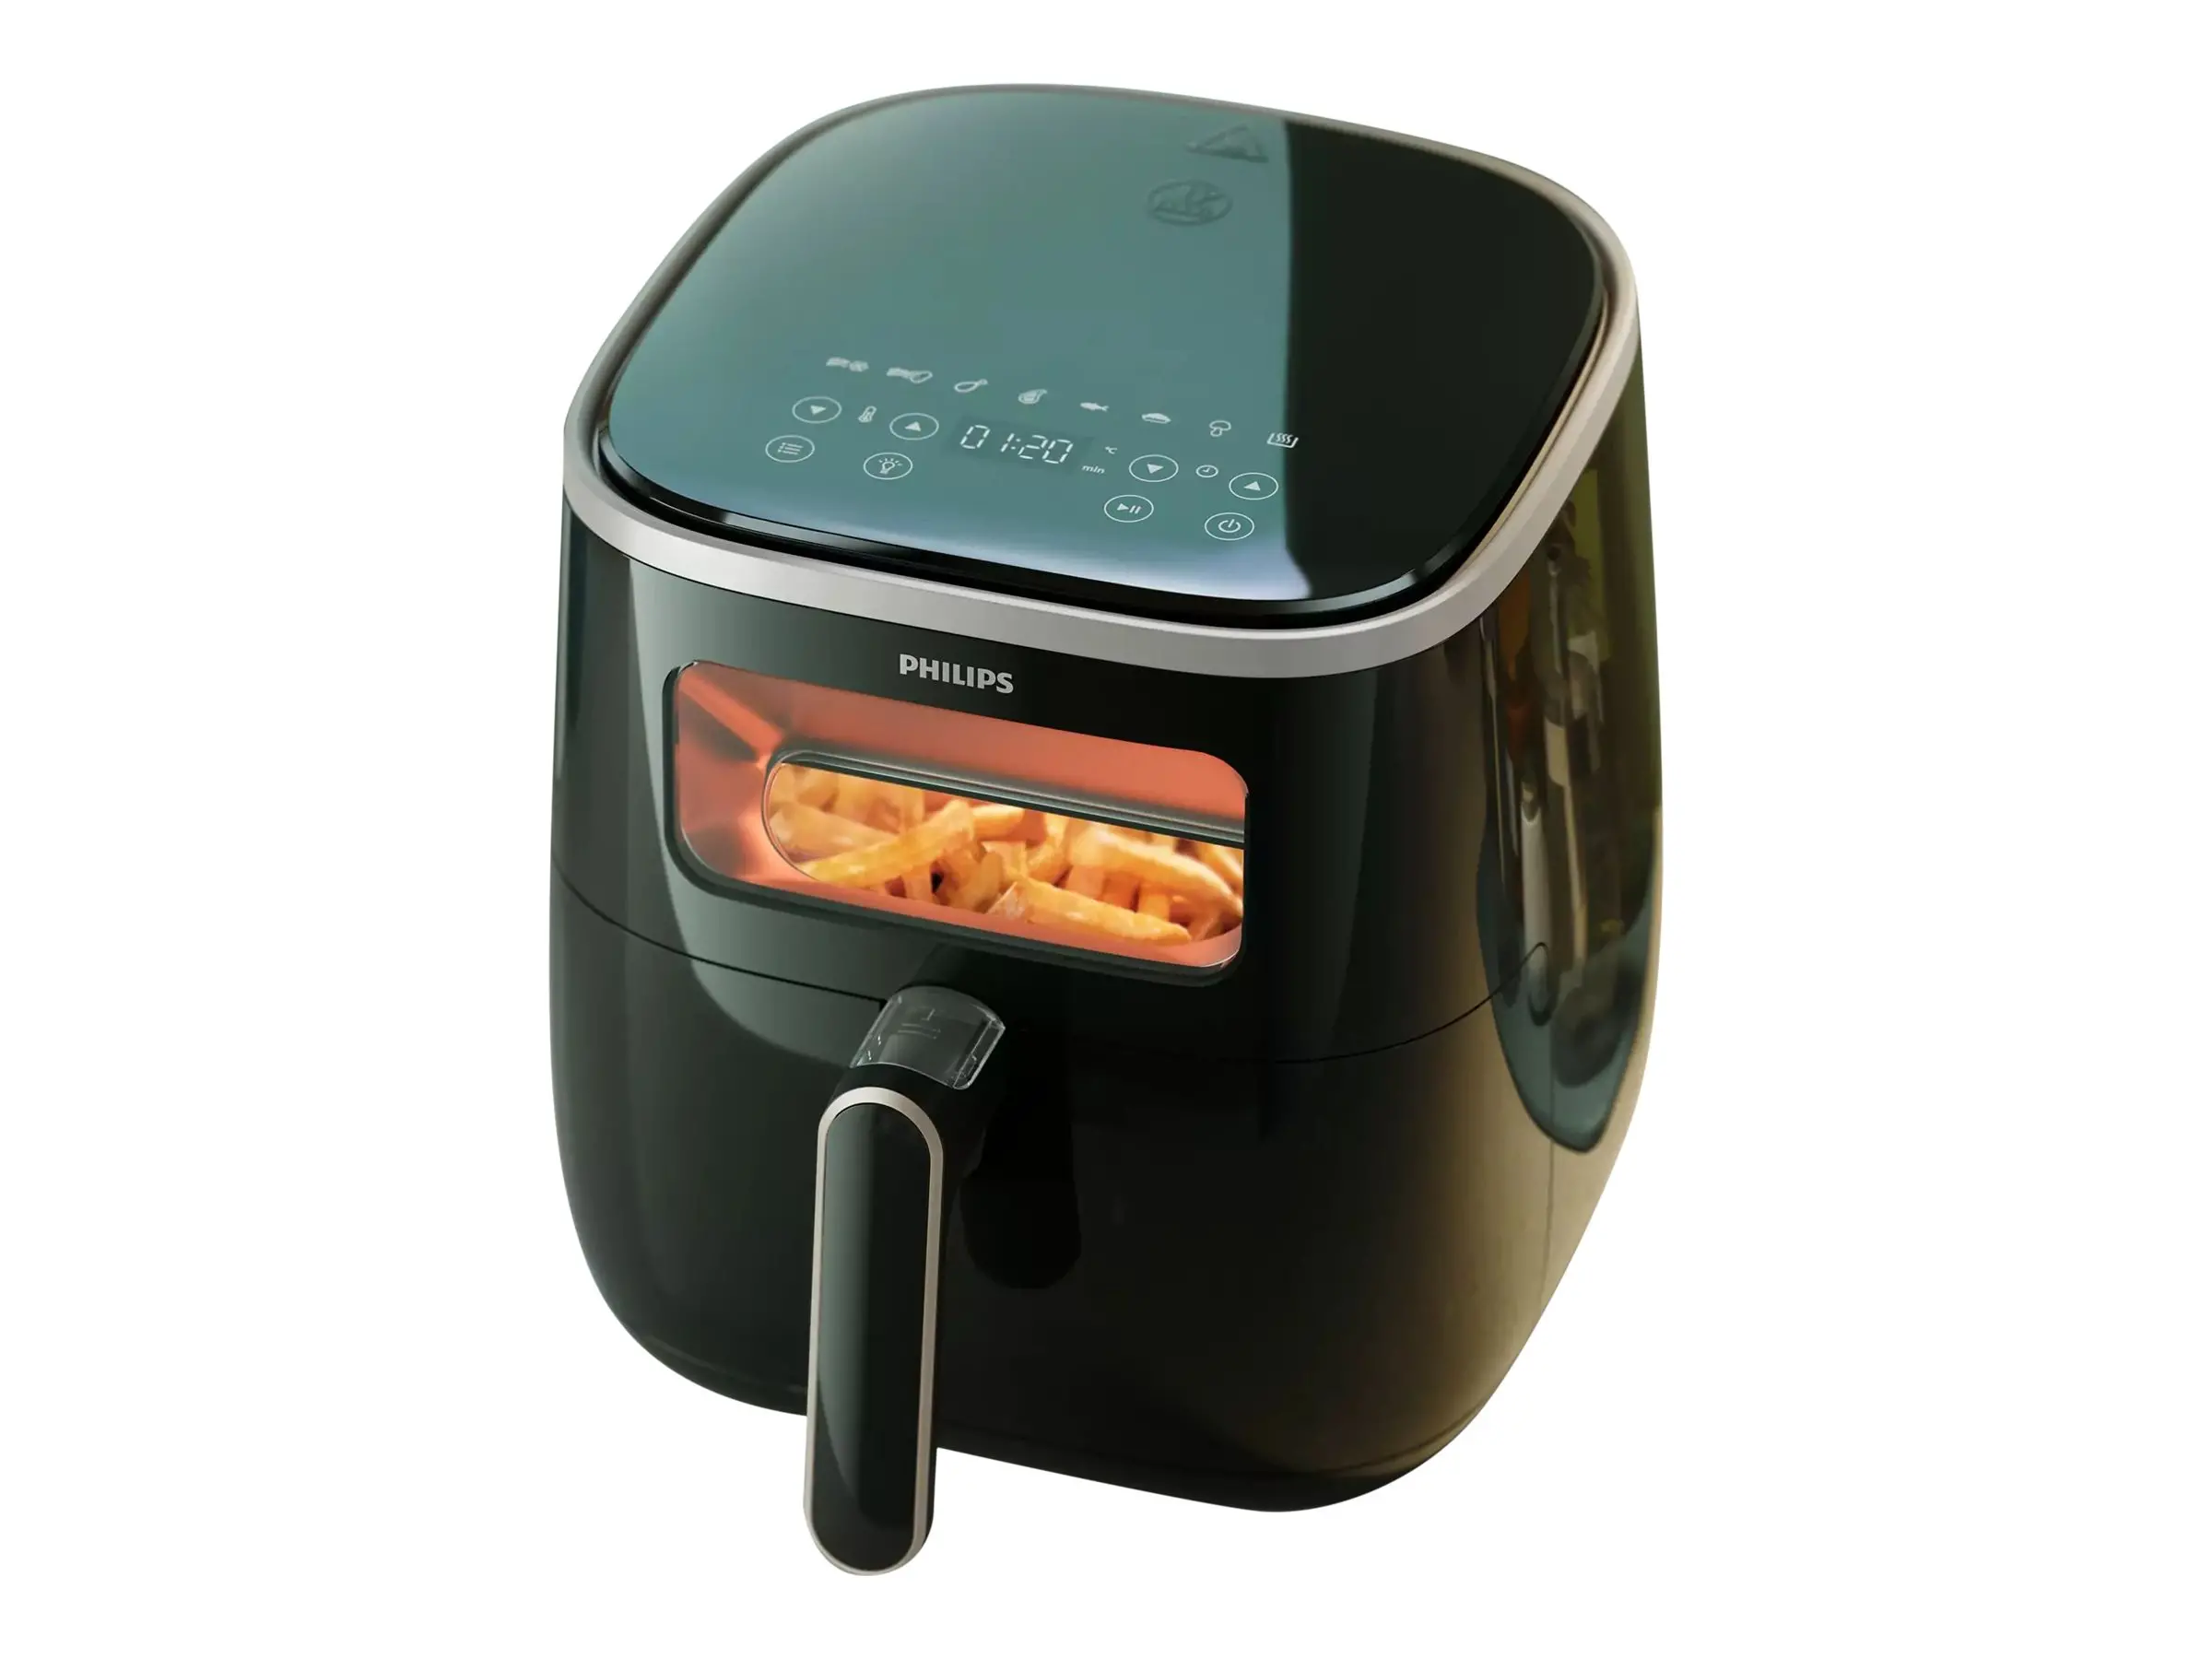 PHILIPS Airfryer 5.6L 1700W see though window NutriU App black - image 3